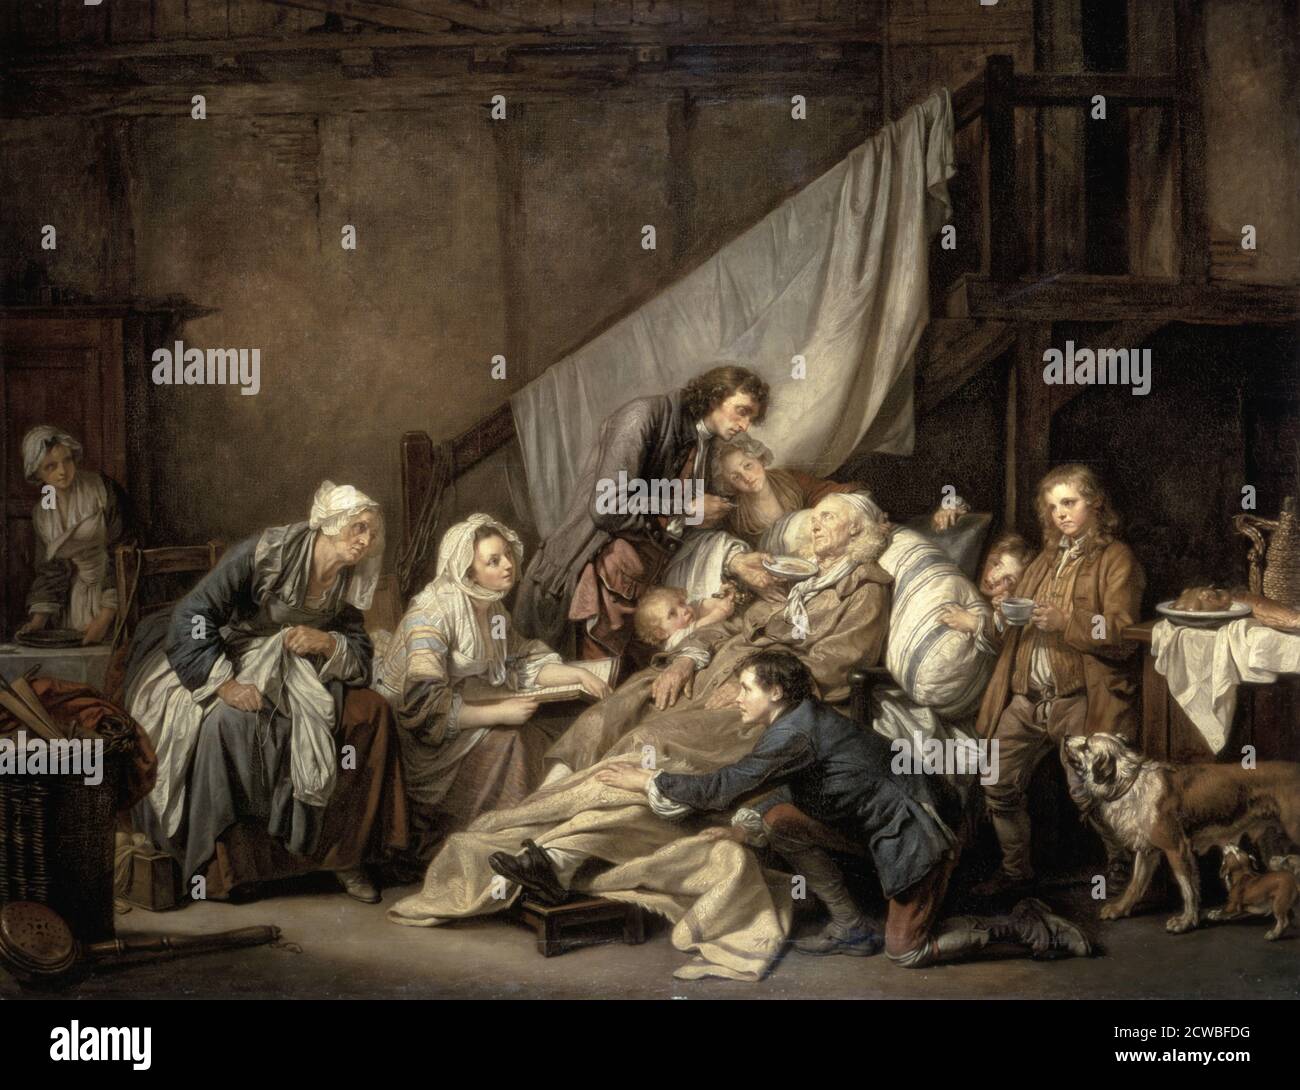 Filial Piety by Jean-Baptiste Greuze. 1763. Jean-Baptiste Greuze (21 August 1725 - 4 March 1805) was a French painter of portraits, genre scenes, and history painting Stock Photo